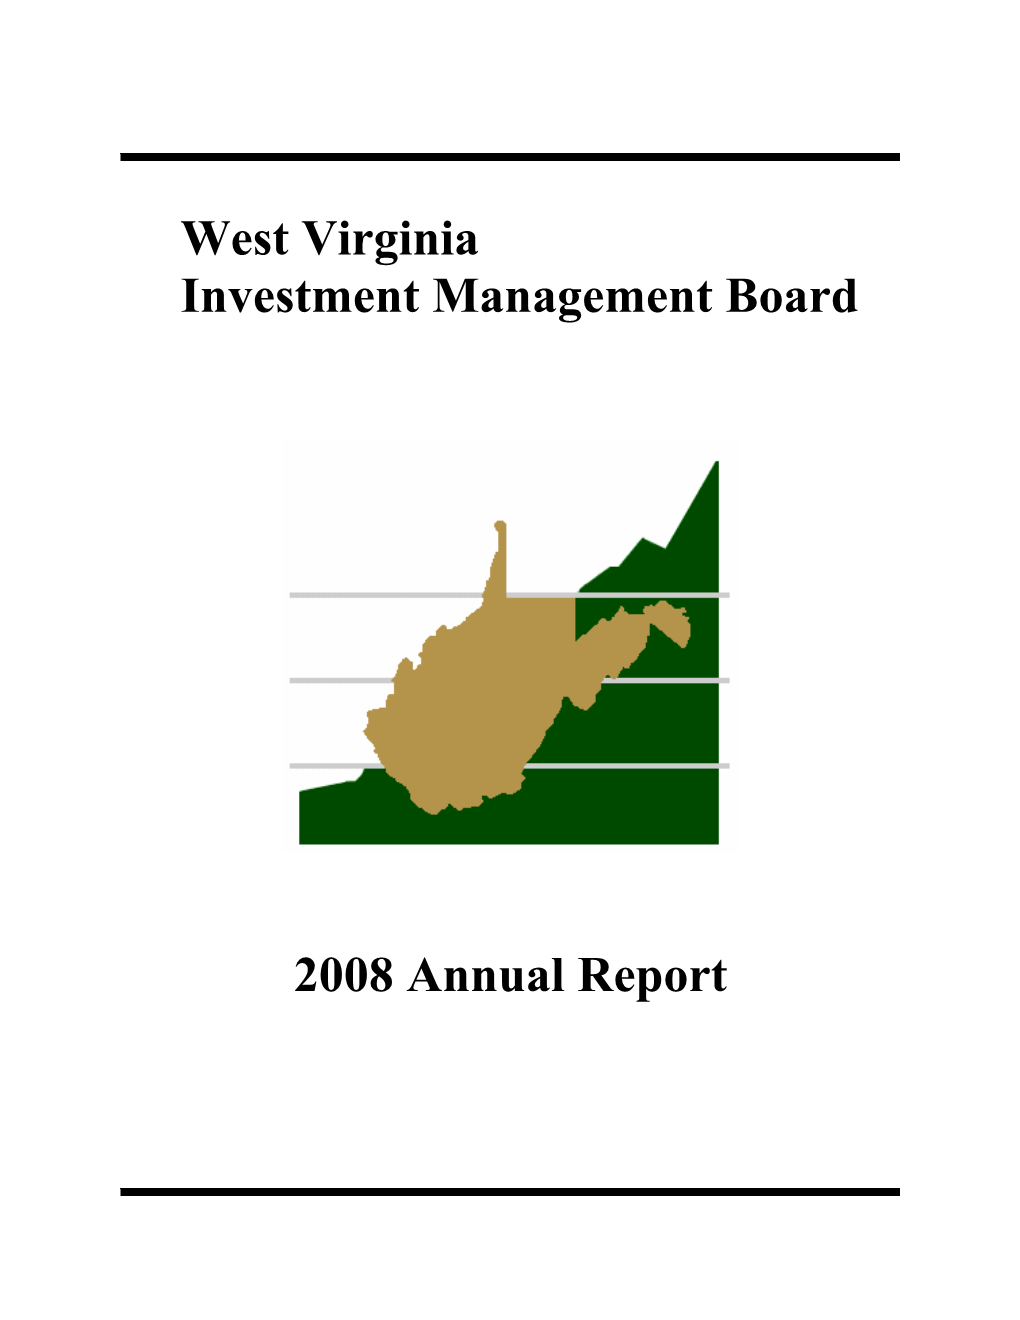 West Virginia Investment Management Board 2008 Annual Report